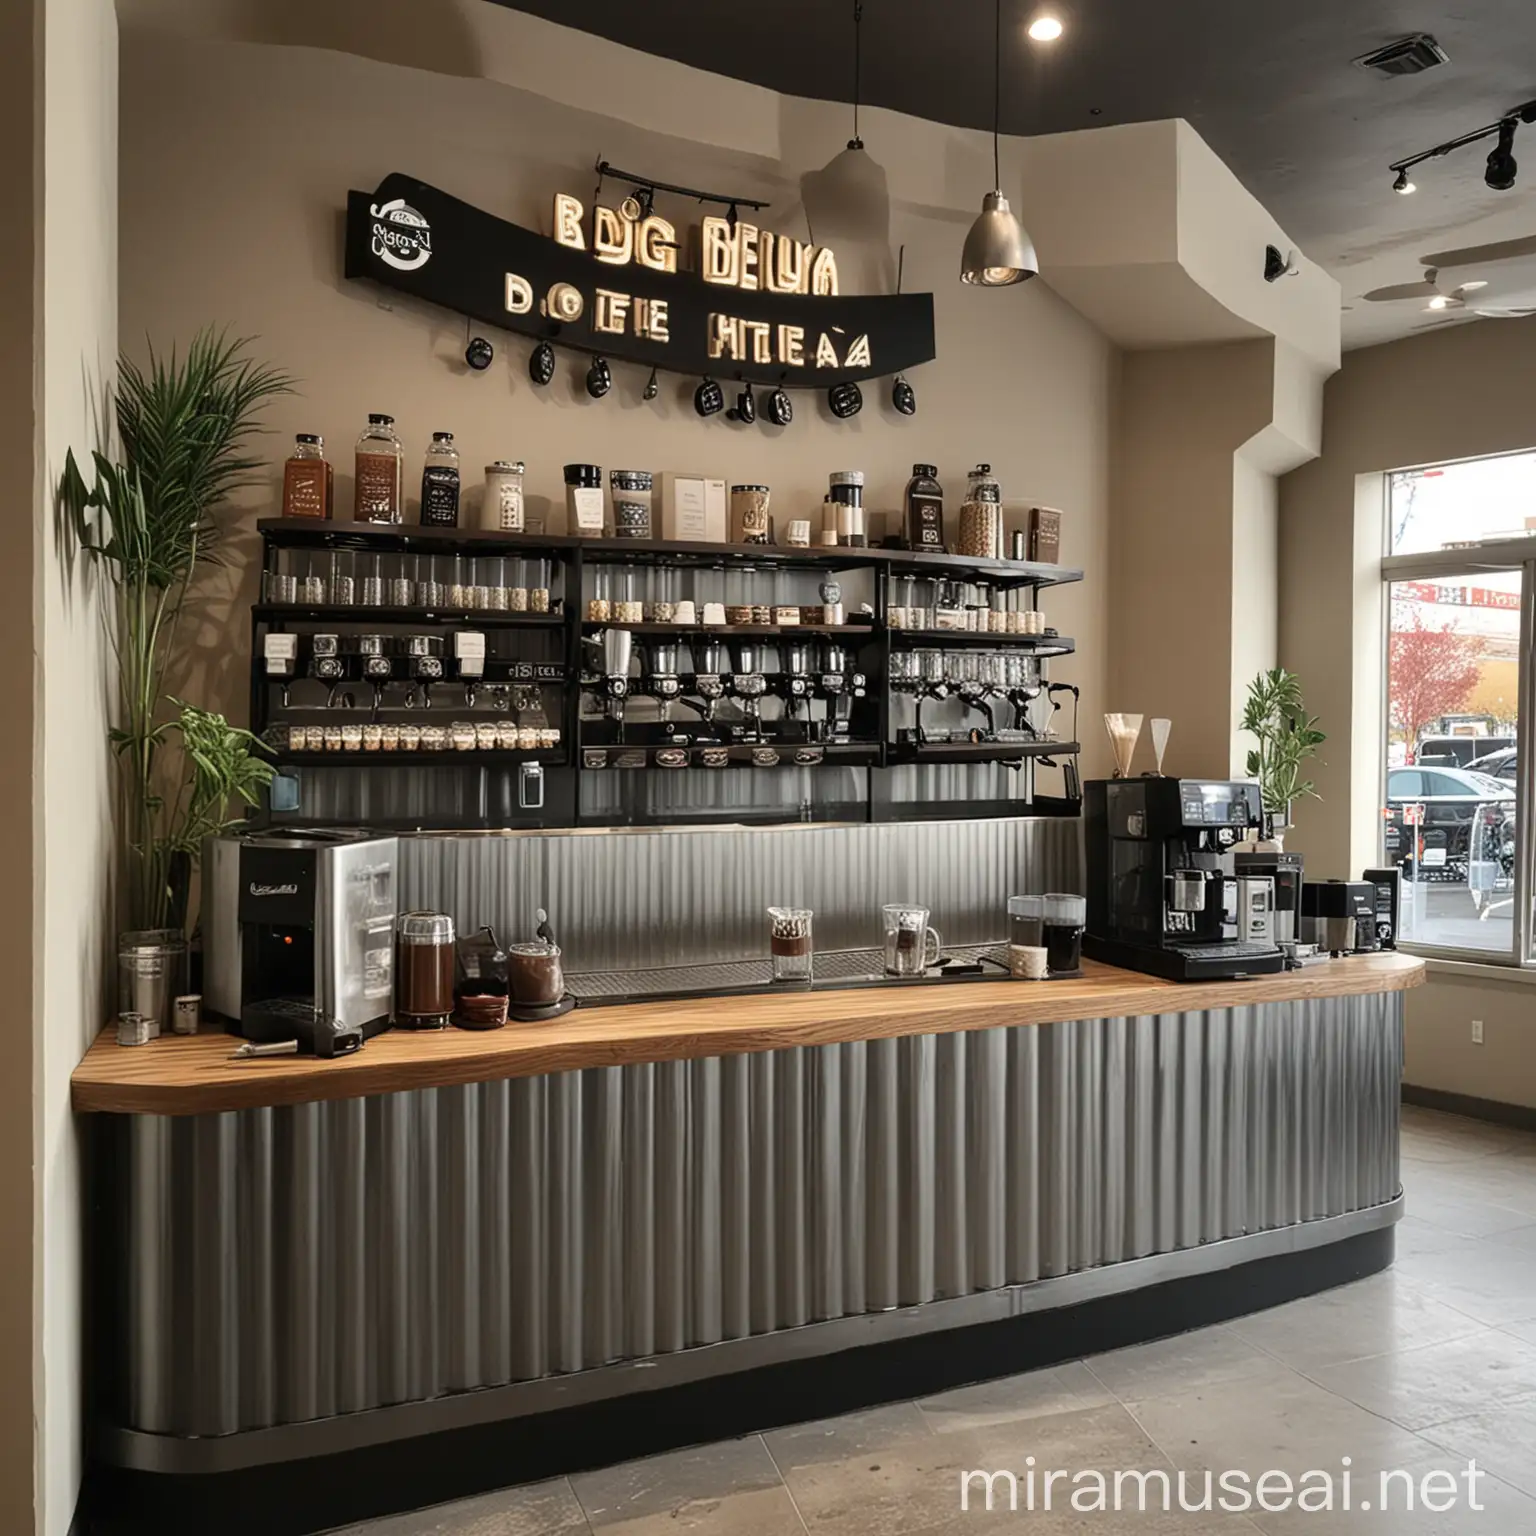 Modern Coffee Shop in a Furniture Mall with Stainless Steel Bar